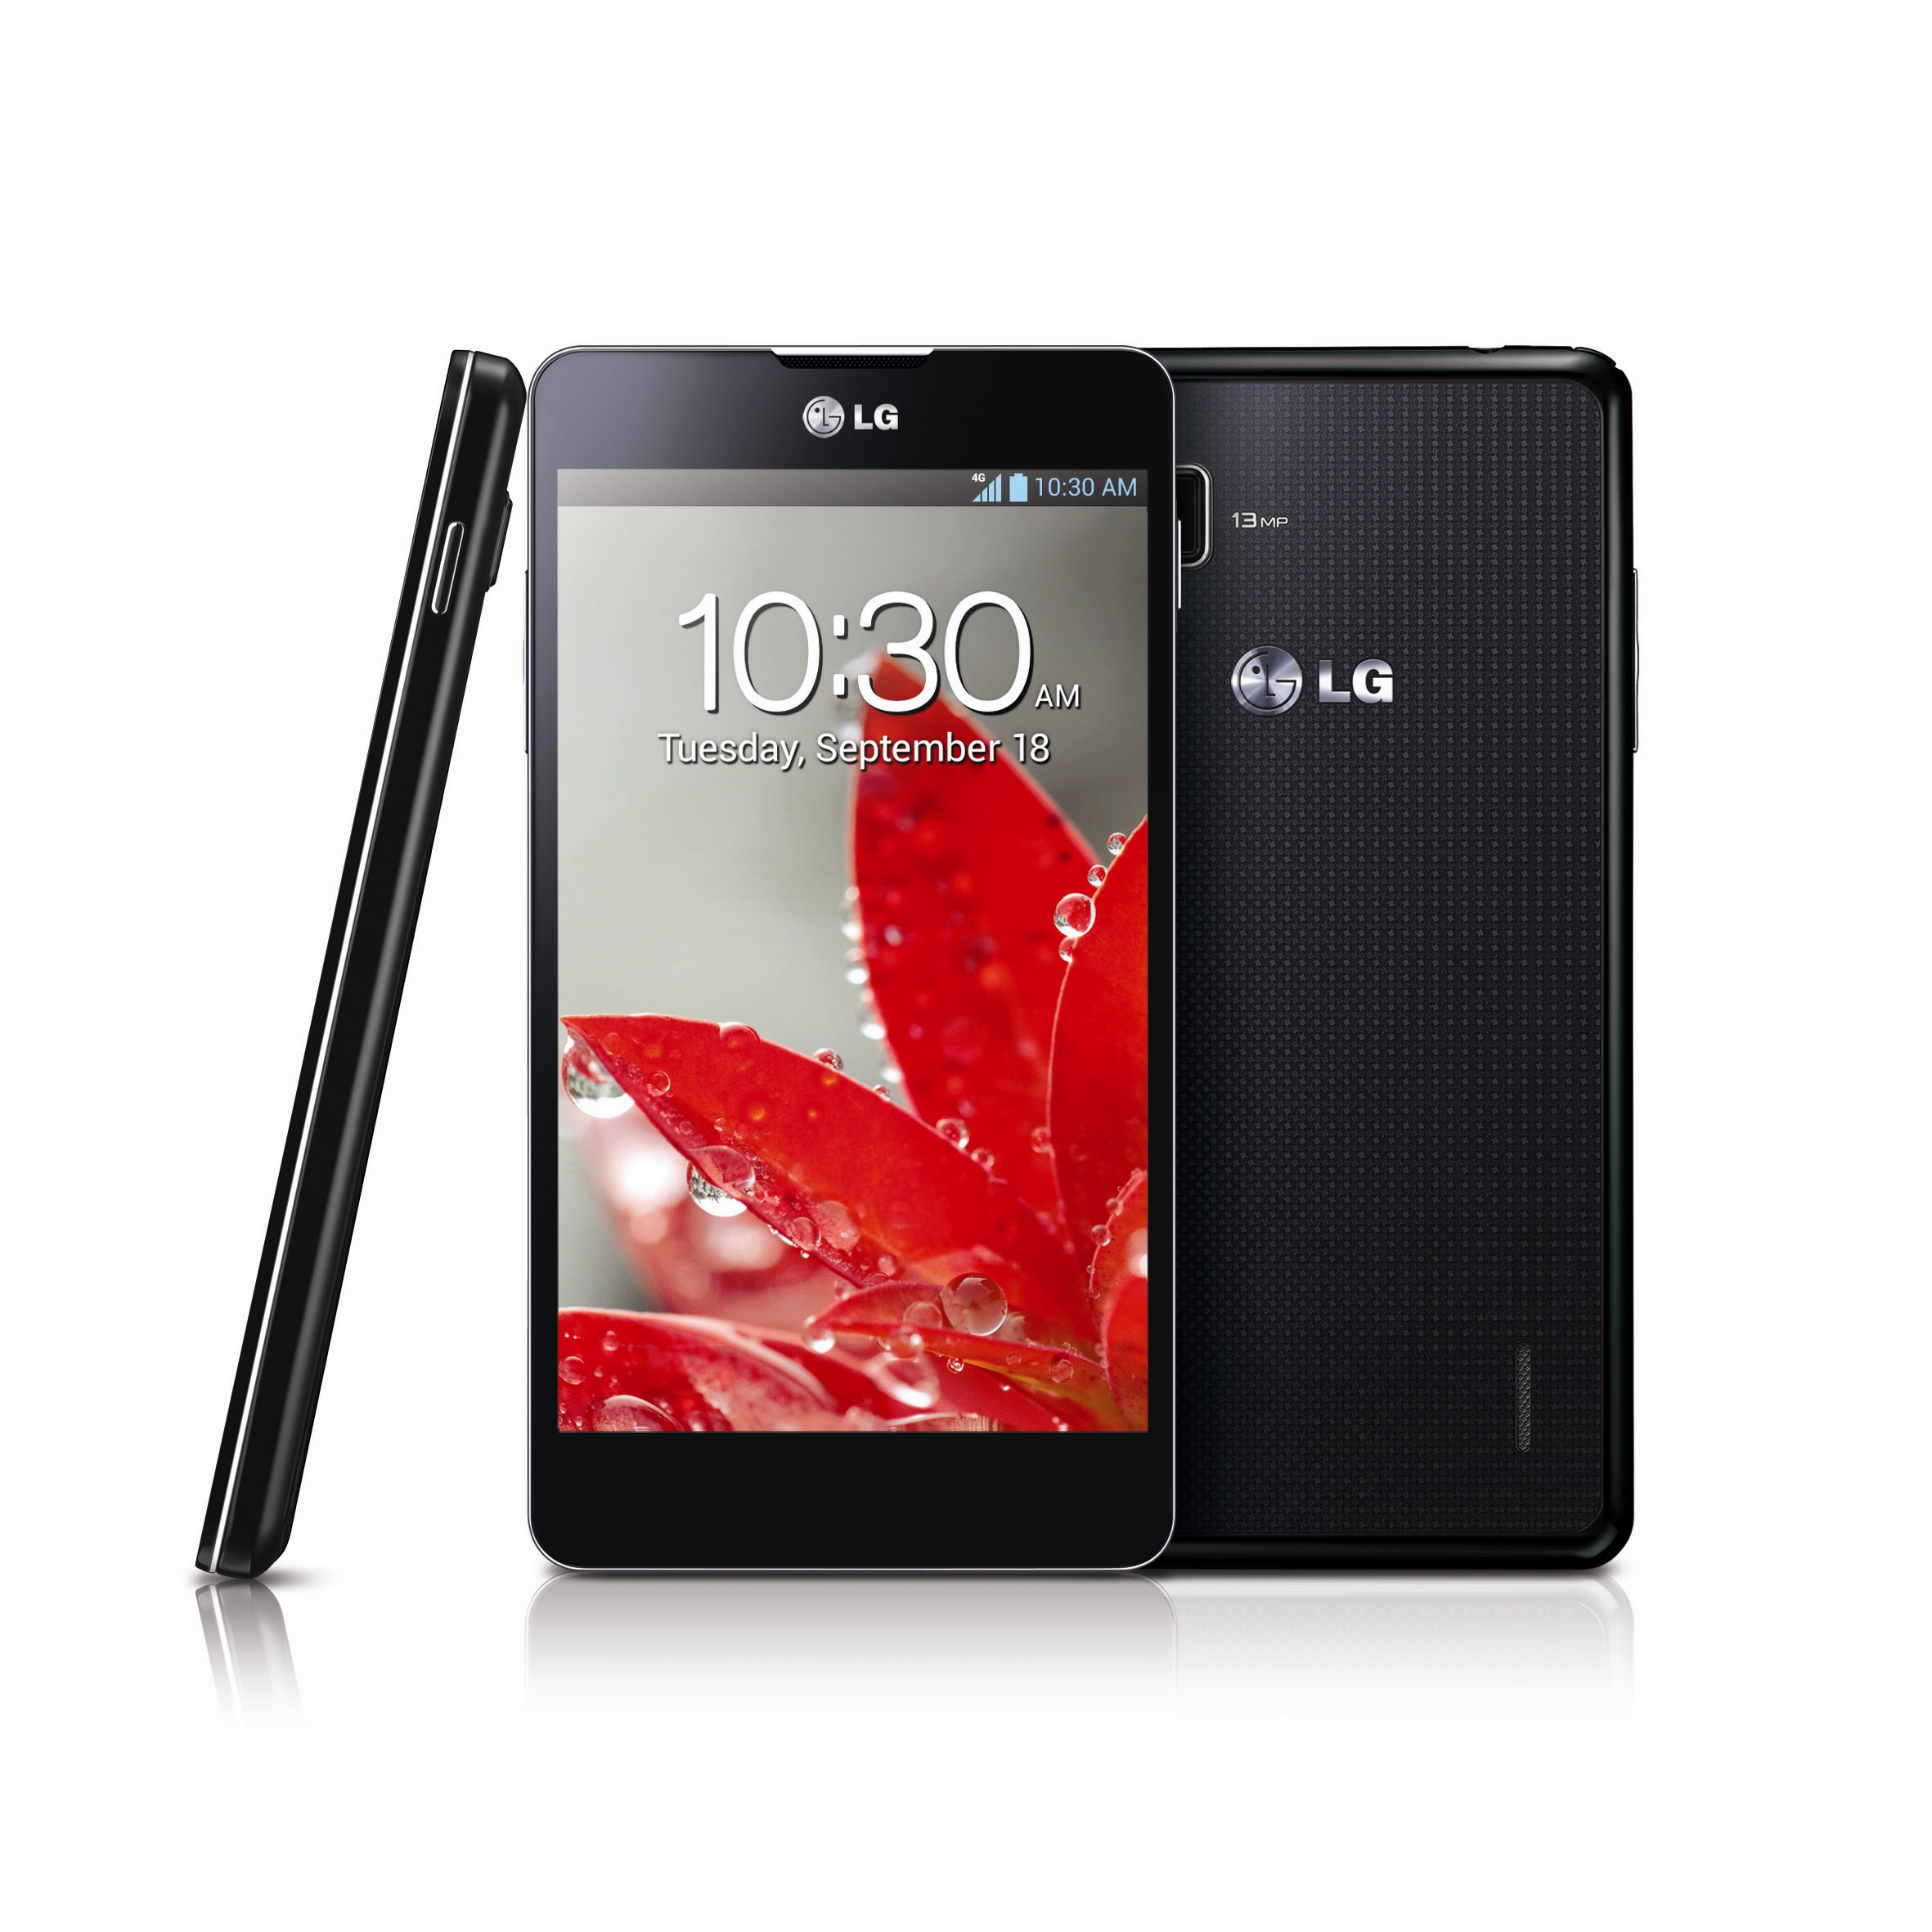 Side, Front and rear views of LG Optimus G